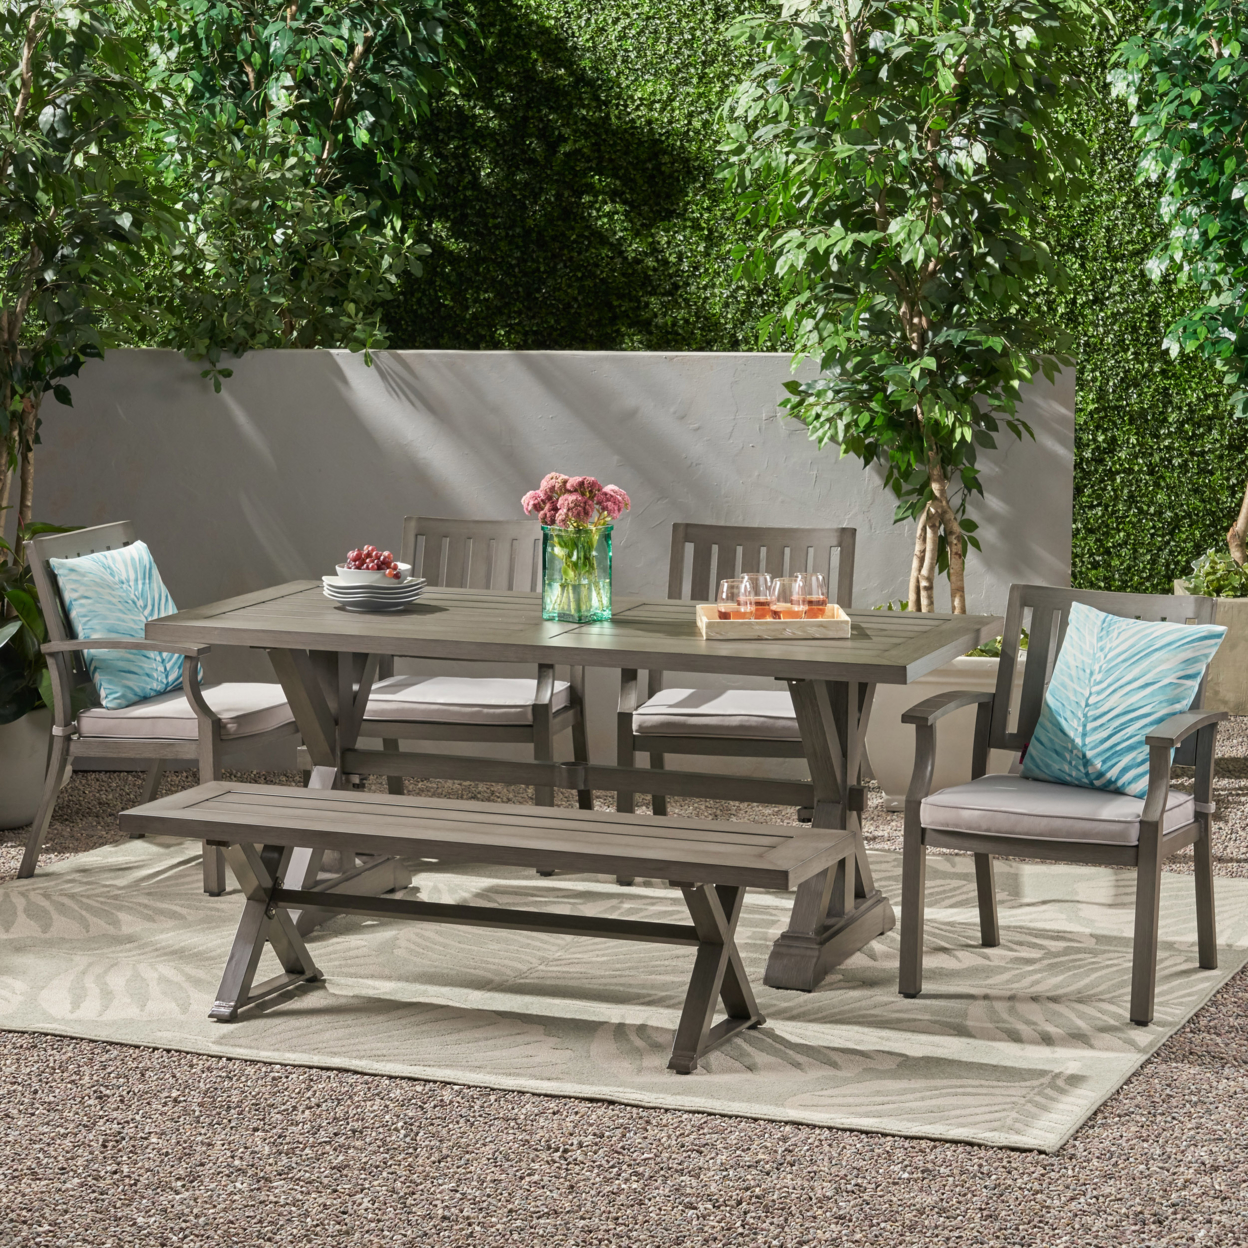 Zoey Outdoor Modern 6 Seater Aluminum Dining Set With Dining Bench